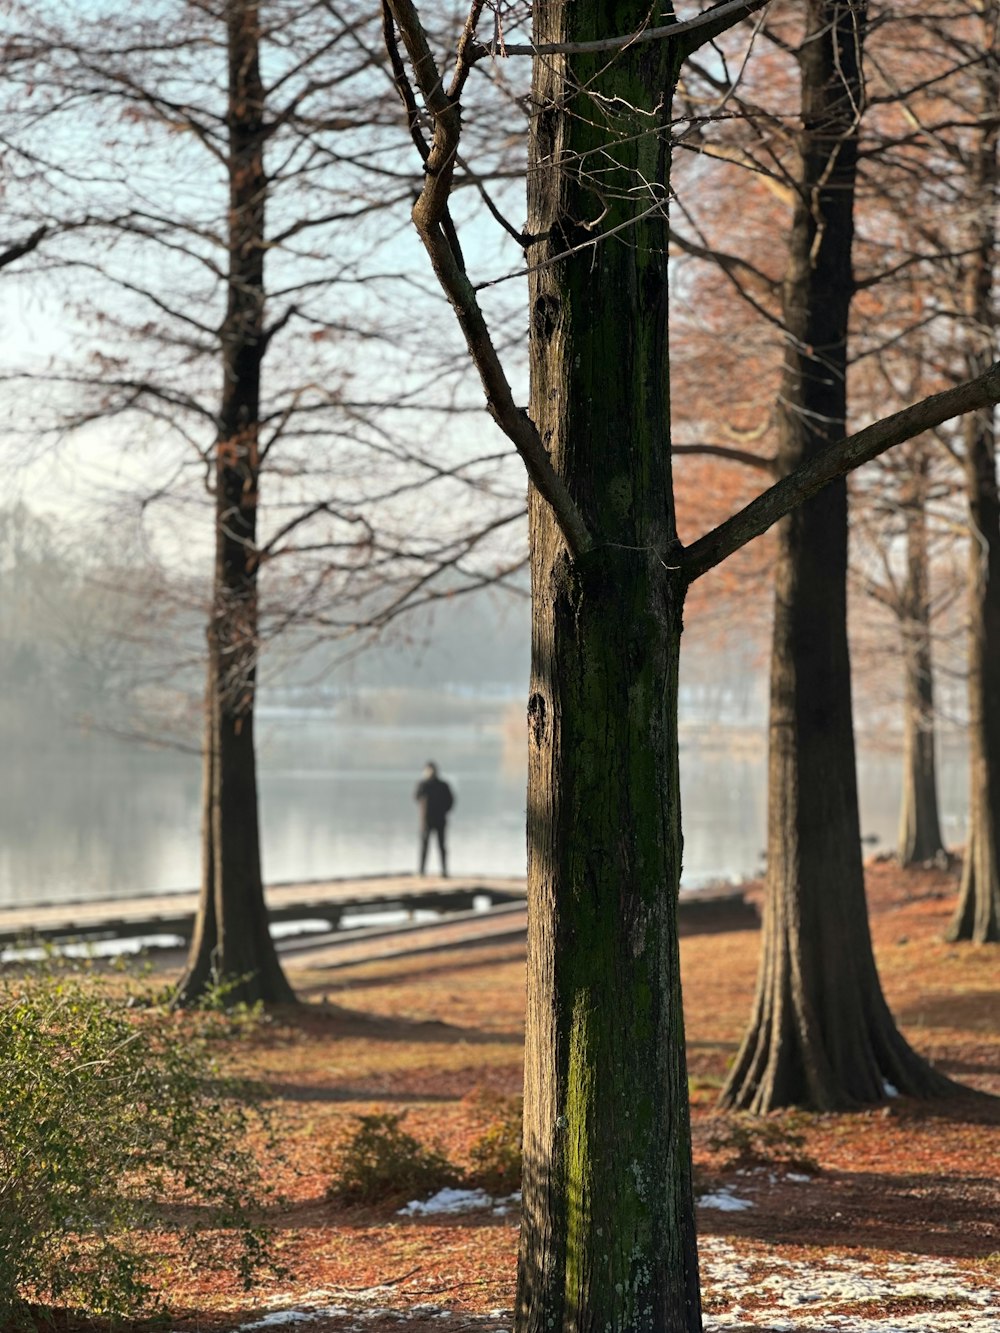 a person walking through a park next to trees